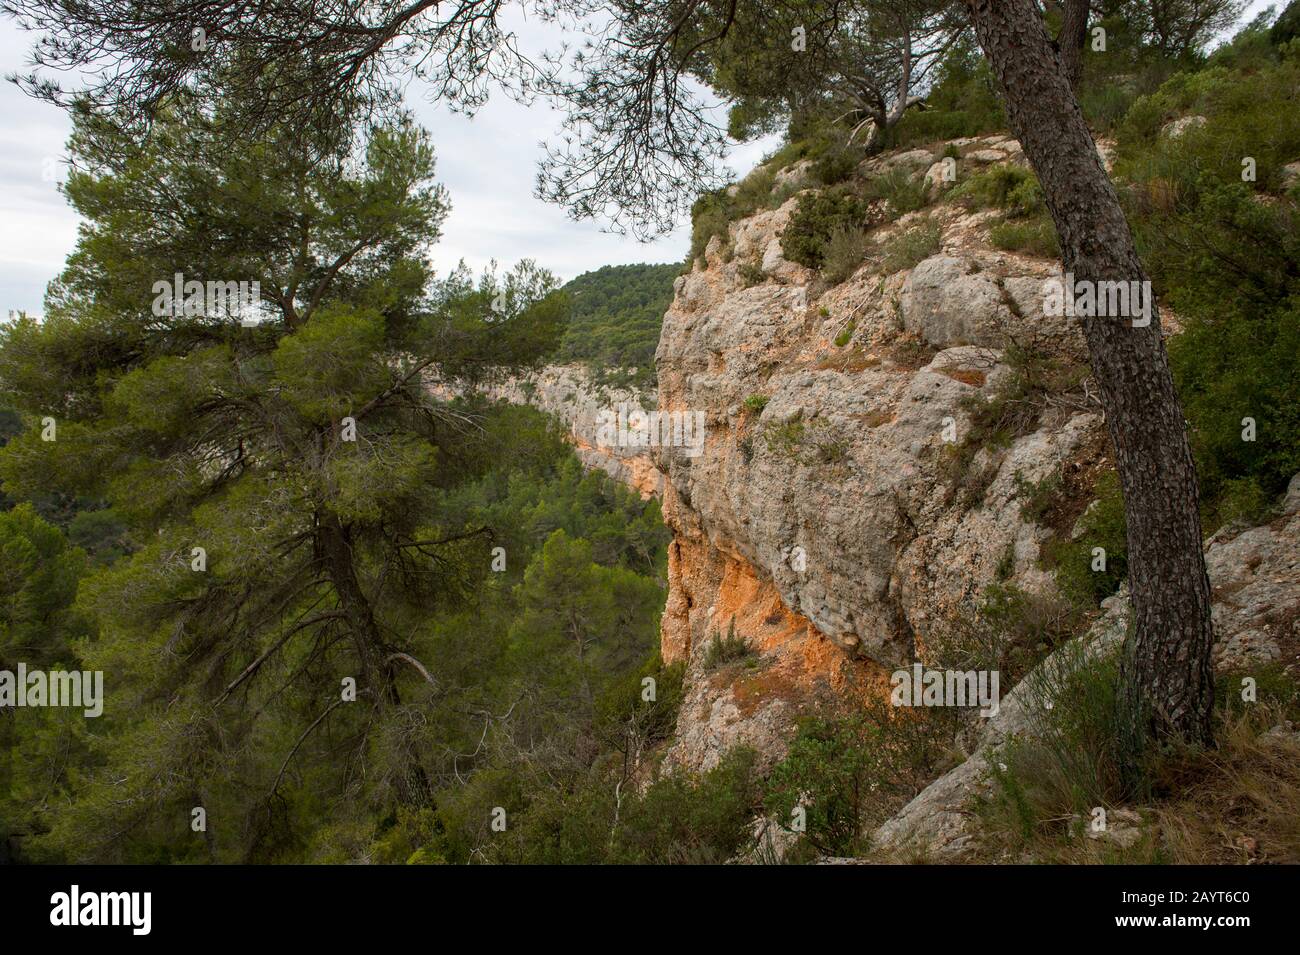 Landscape with rock formations at to the Francois Zola Dam, near the village of Le Tholonet, Aix-en-Provence, France. Stock Photo